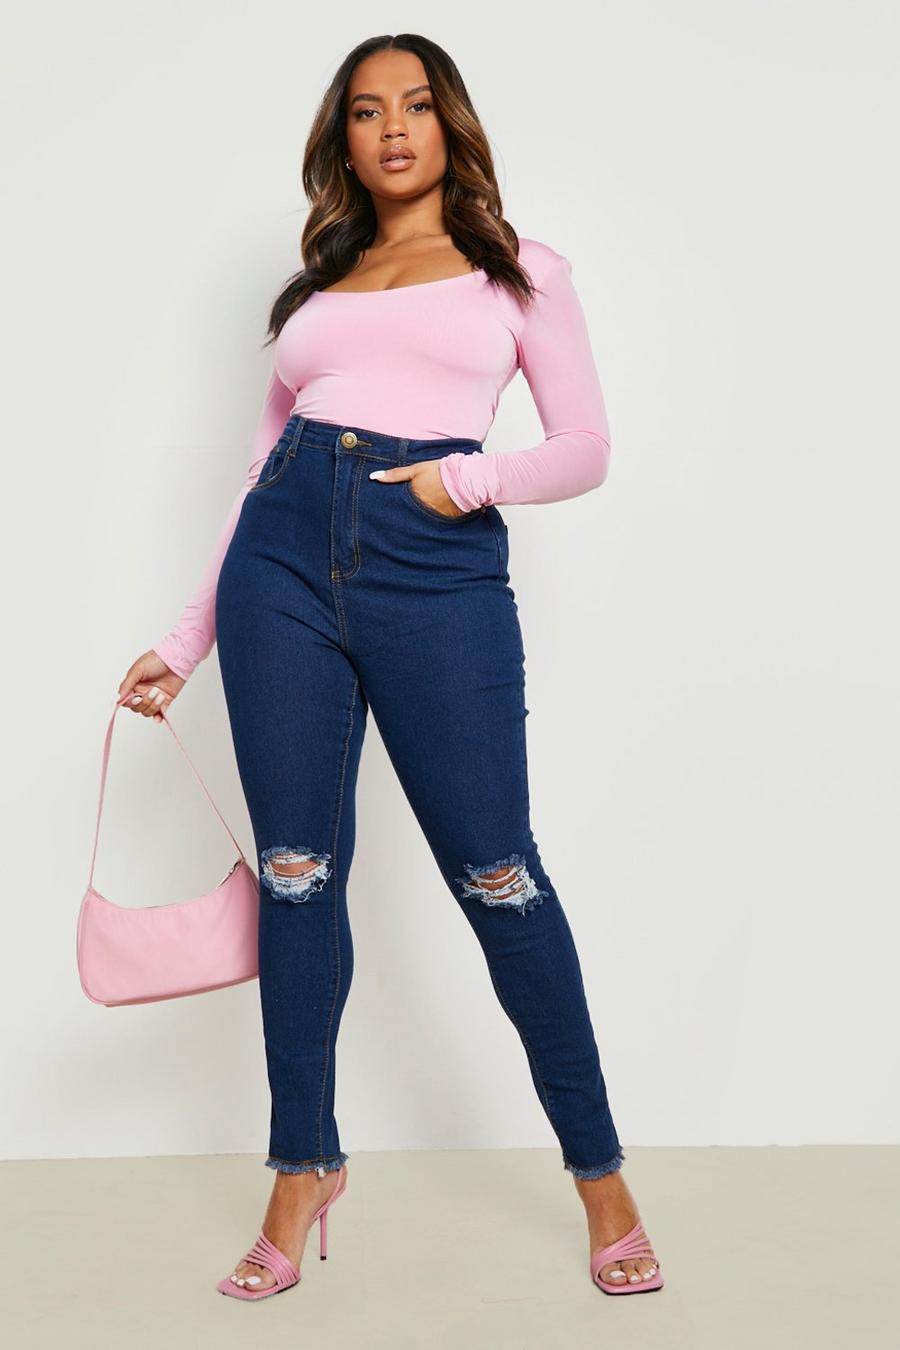 Off Duty Style: Forever 21 Plus Size Crop Top and Ripped Jeans